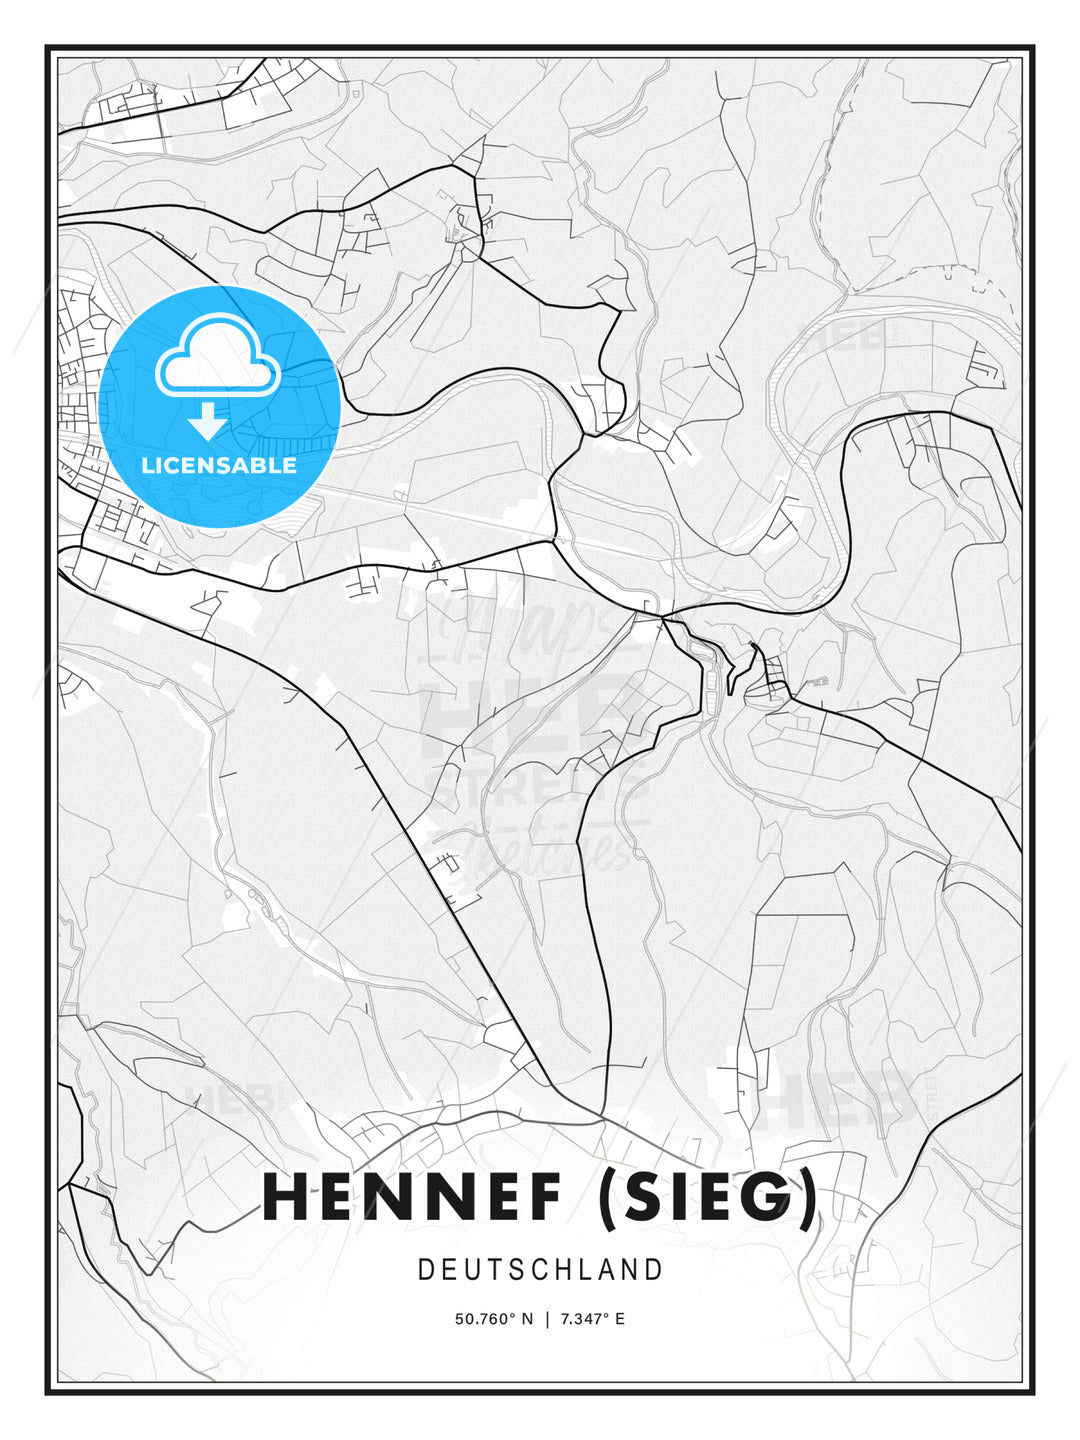 Hennef (Sieg), Germany, Modern Print Template in Various Formats - HEBSTREITS Sketches